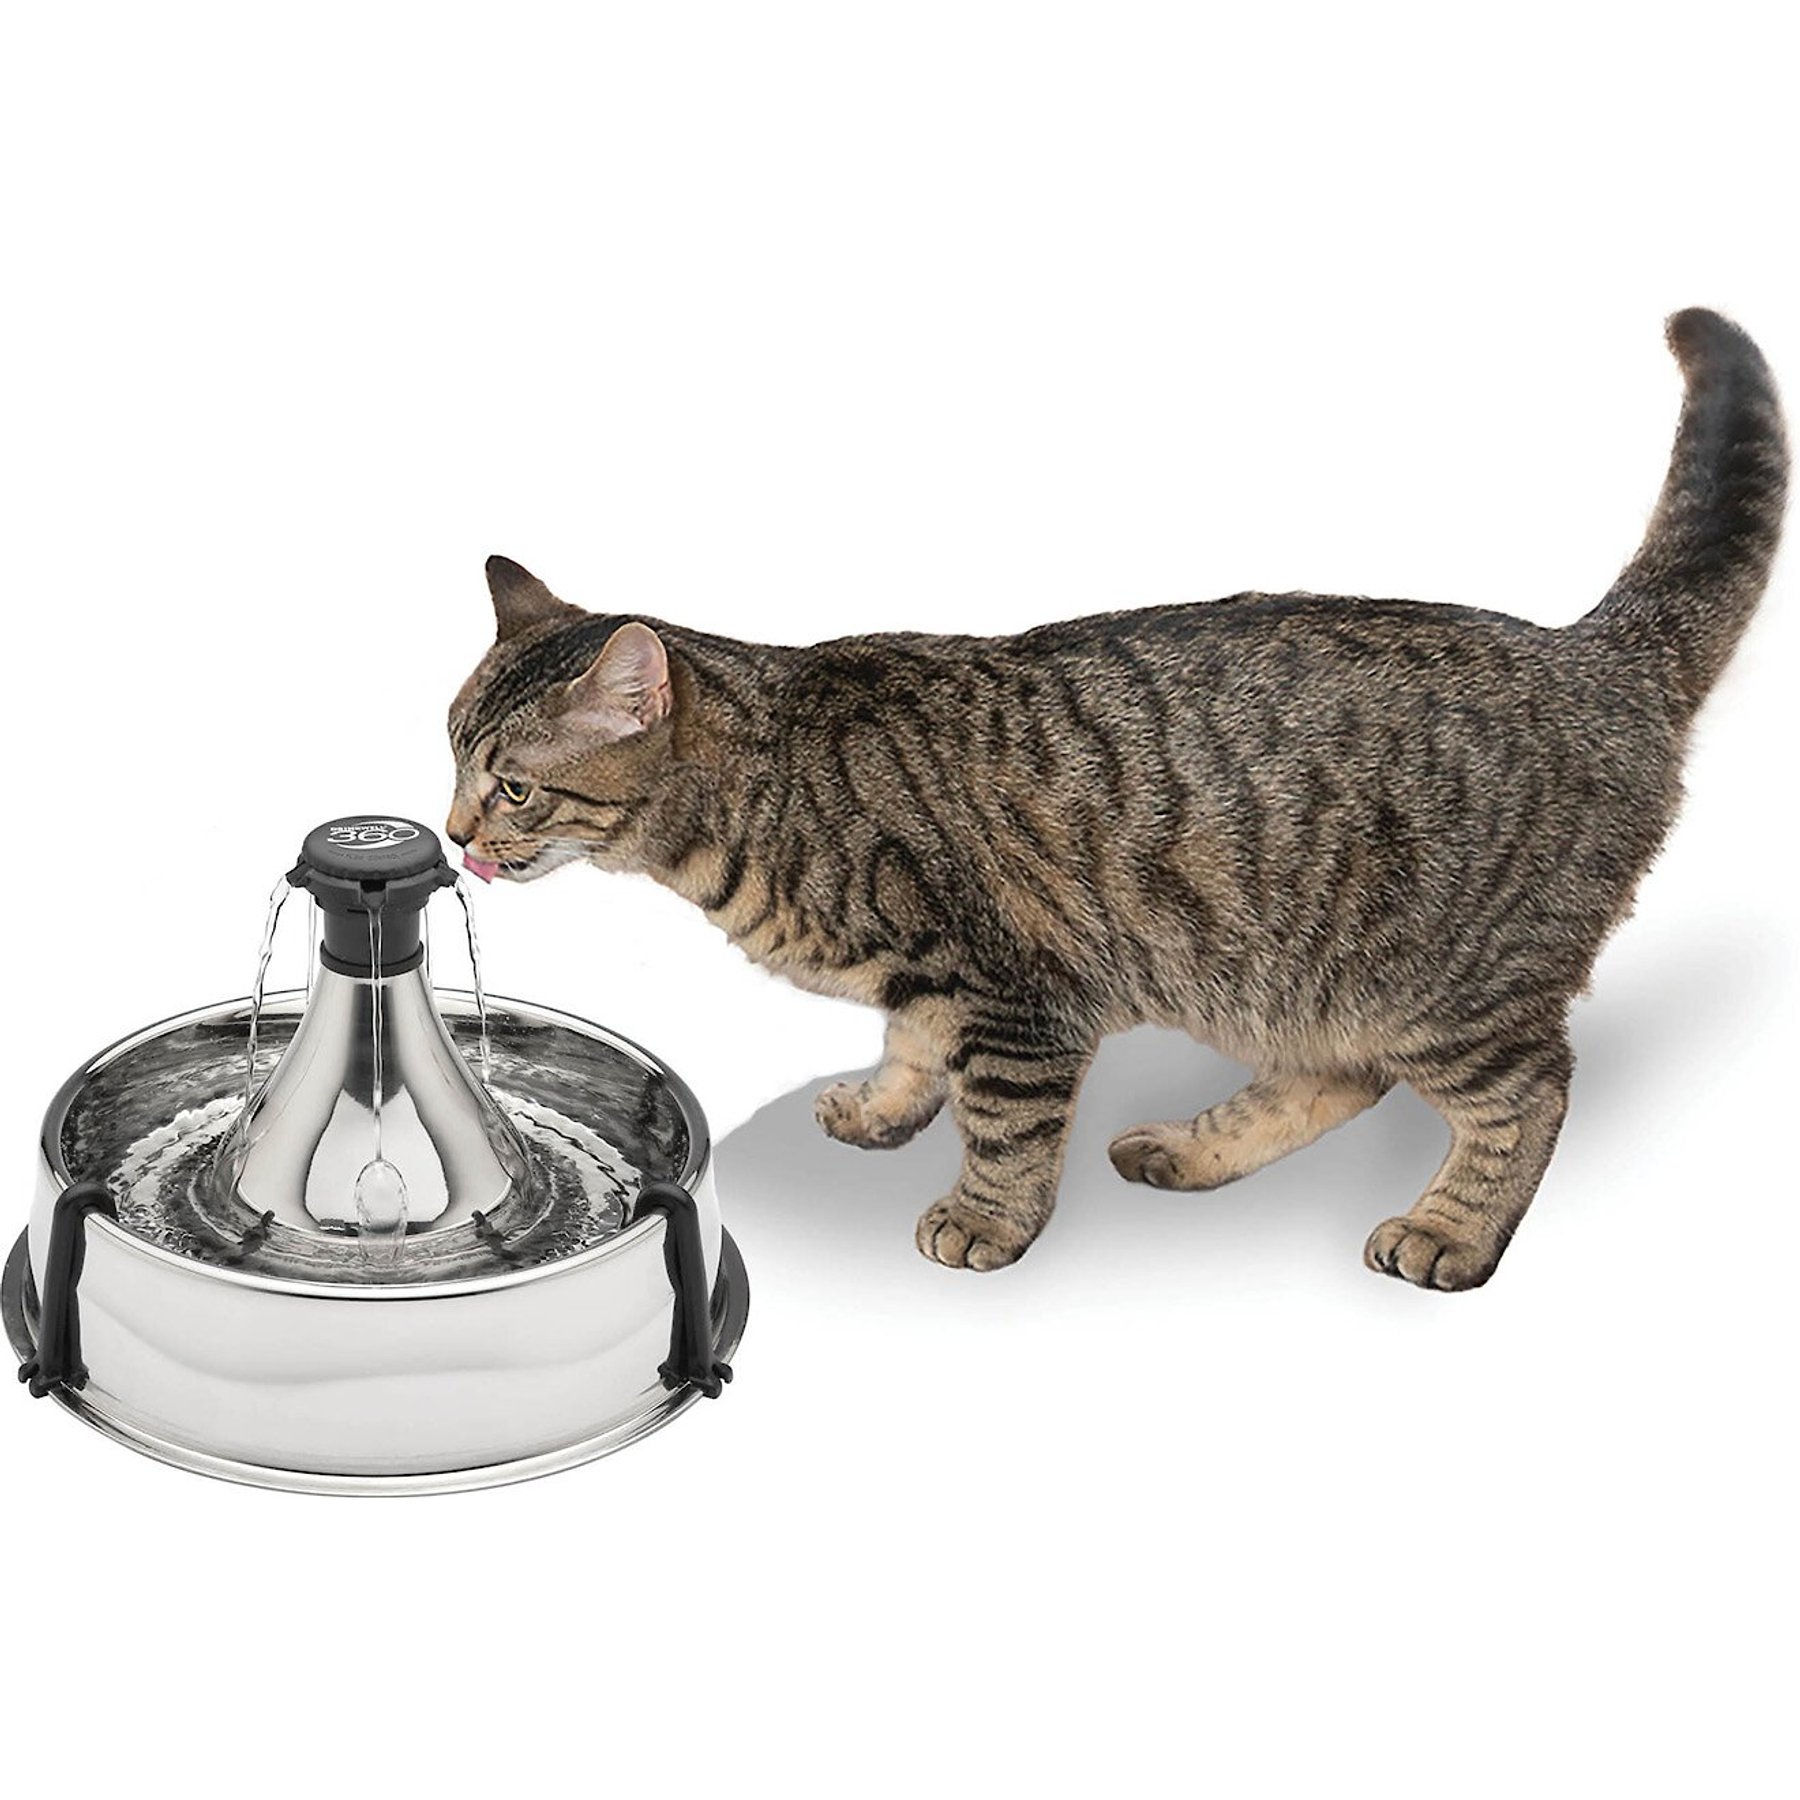 Stainless Steel Automatic Pet Water Dispenser - Perfect for Cats and Dogs -  Easy to Use and Clean